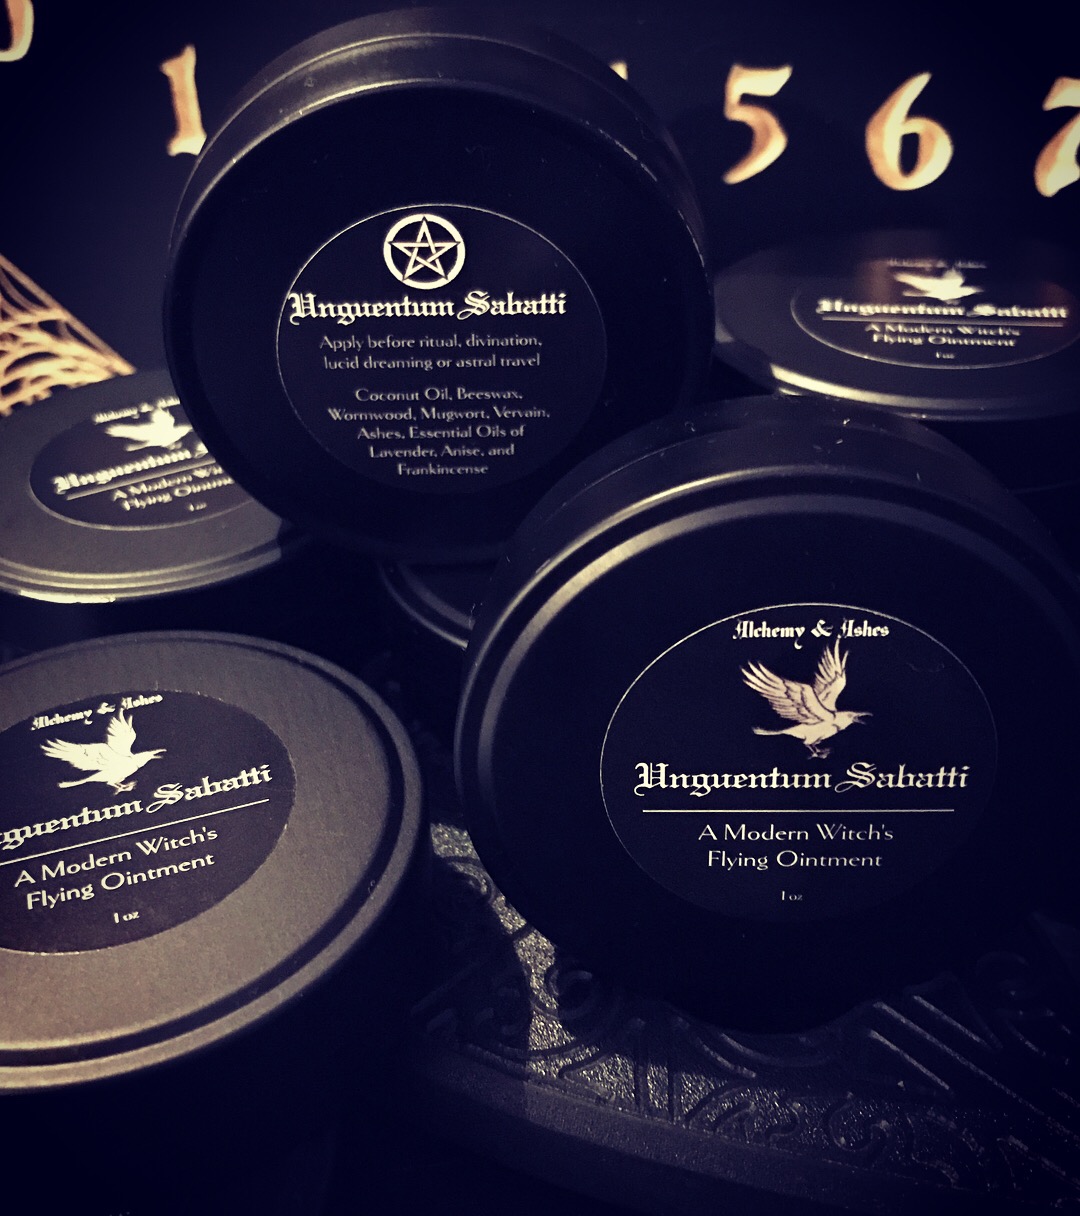 Witch's Flying Ointment by Alchemy and Ashes